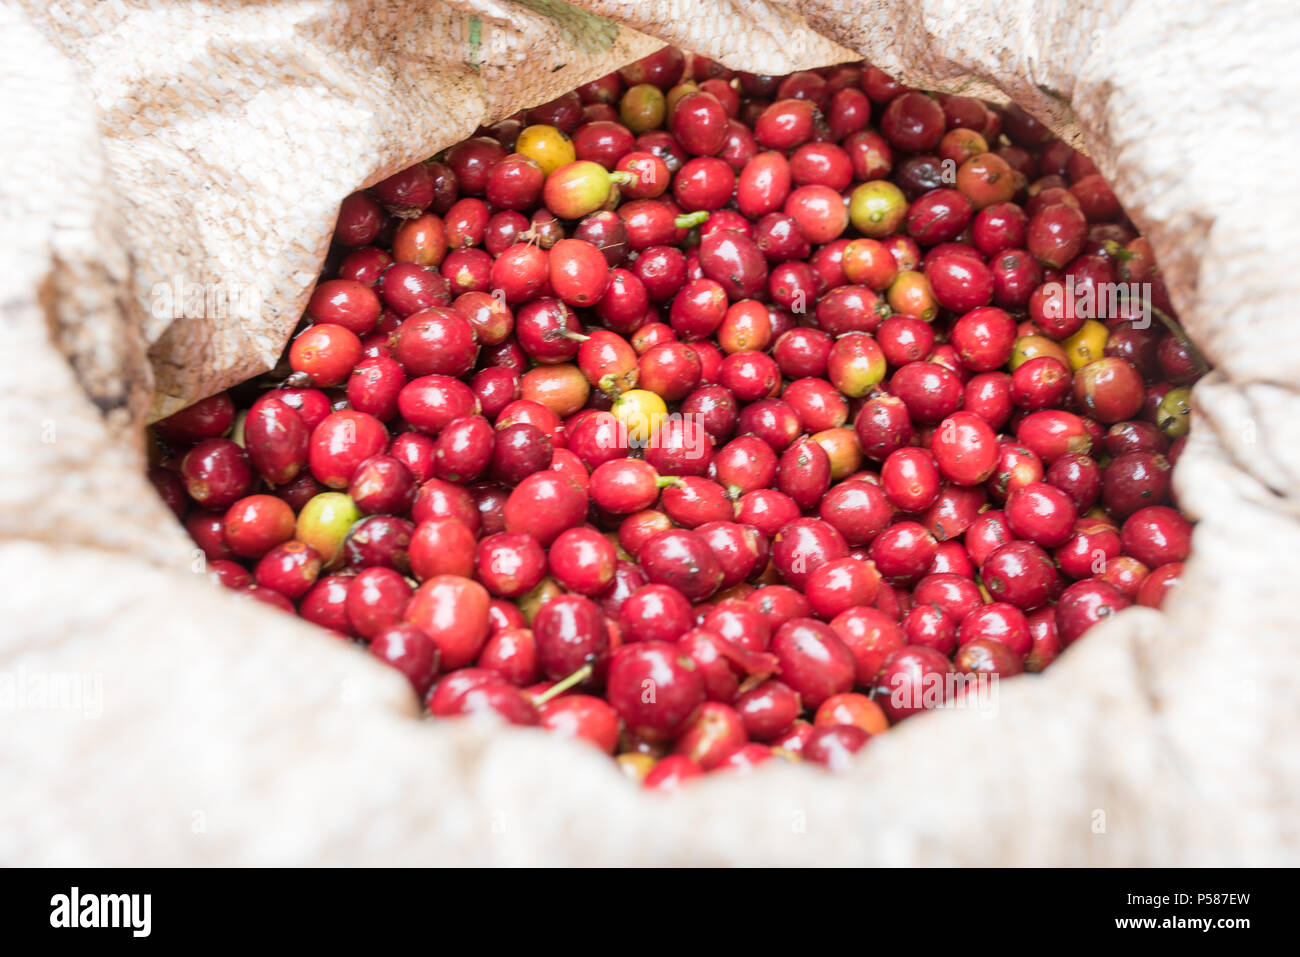 Red ripe coffee beans in bag Stock Photo